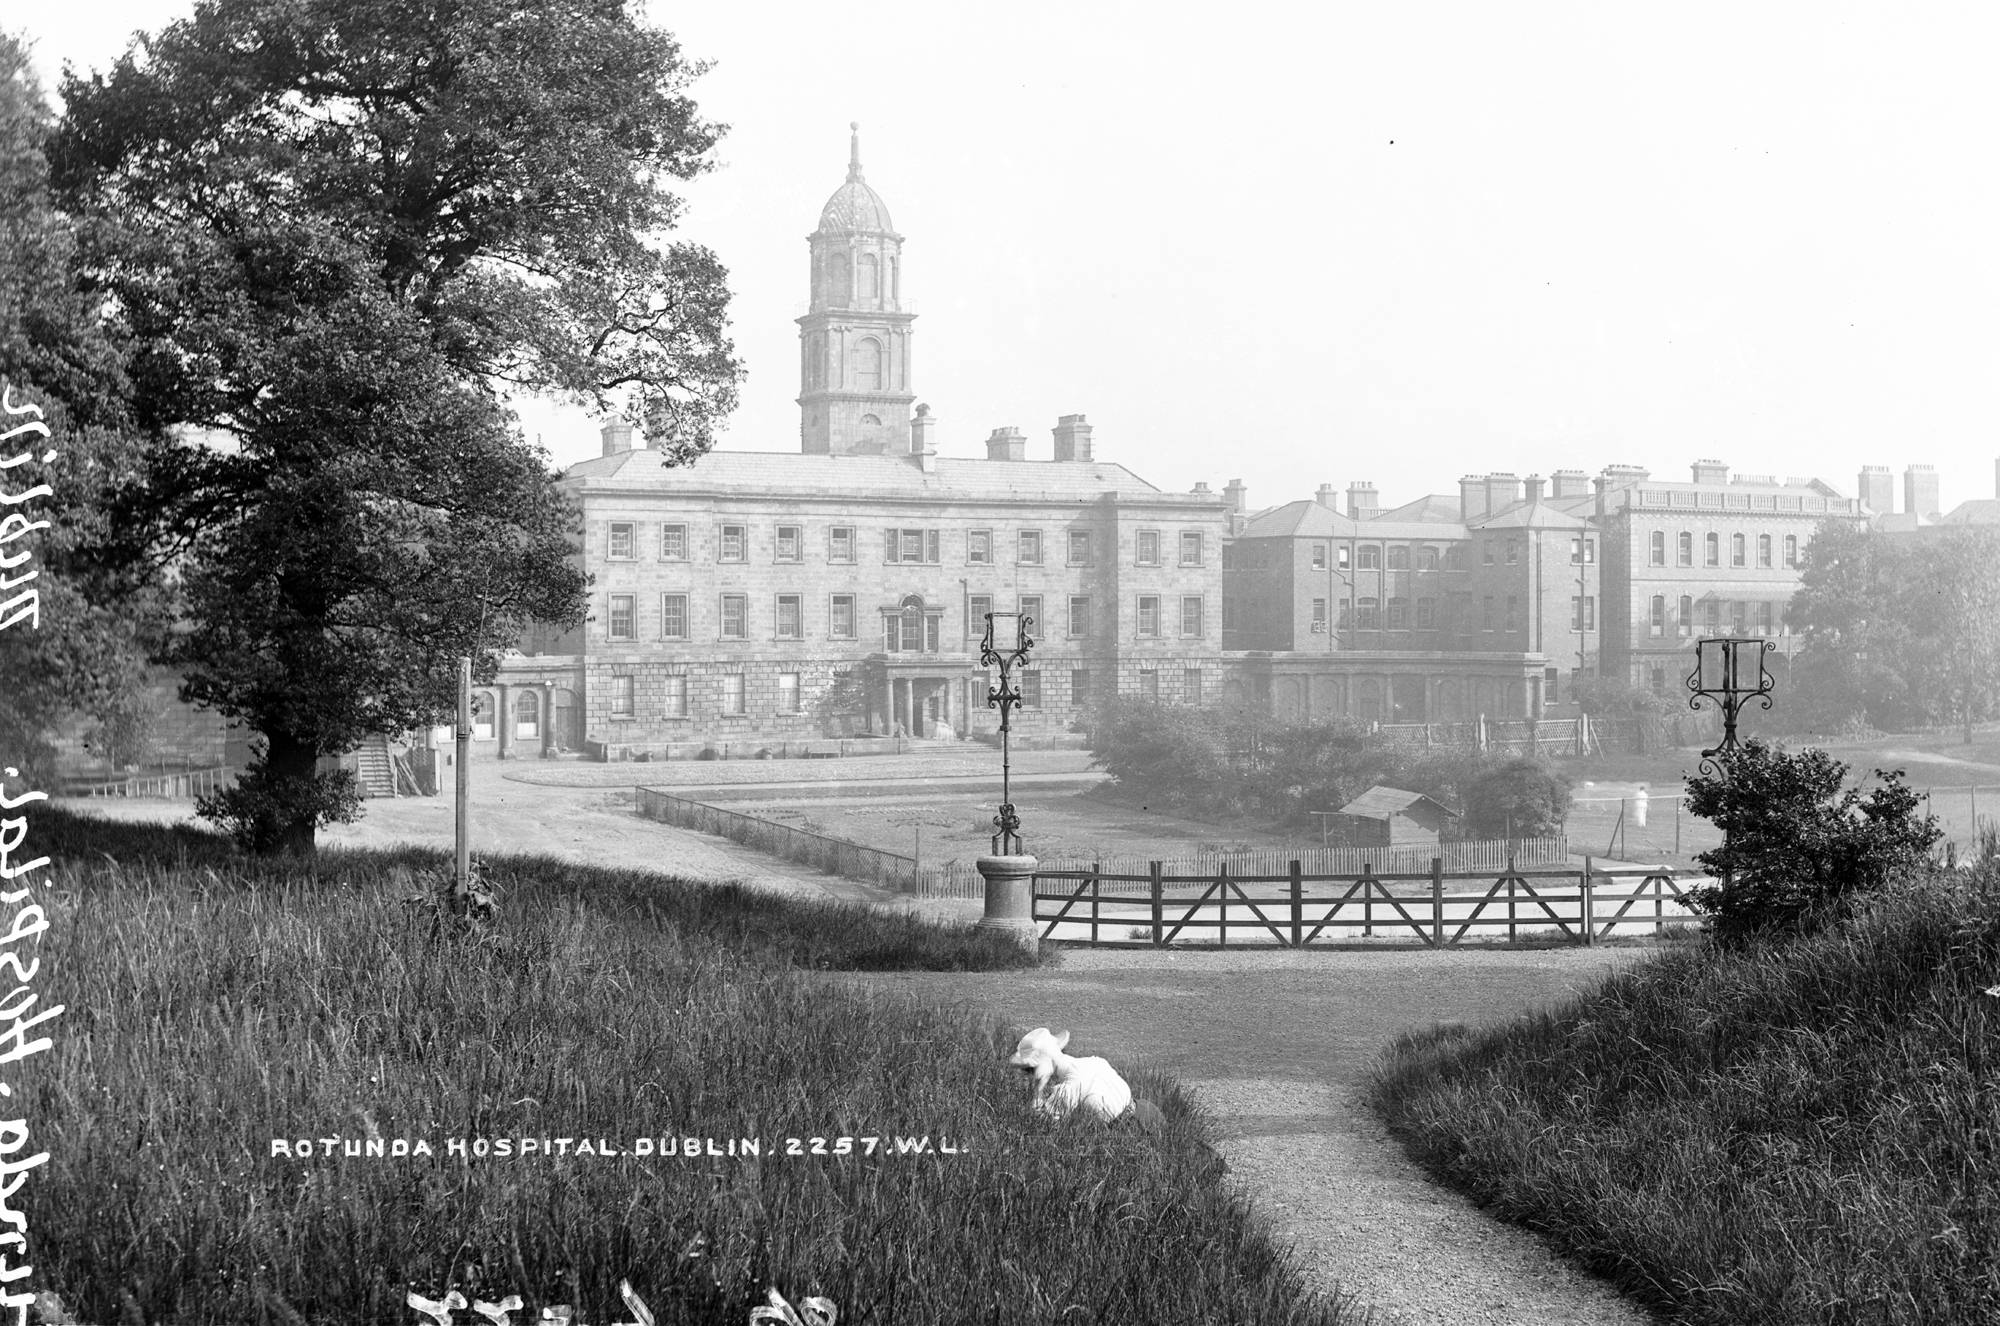 Part of the Lawrence Collection, Robert French probably took this image of the back of the Rotunda (now occupied by the Garden of Remembrance) around 1900. National Library of Ireland.